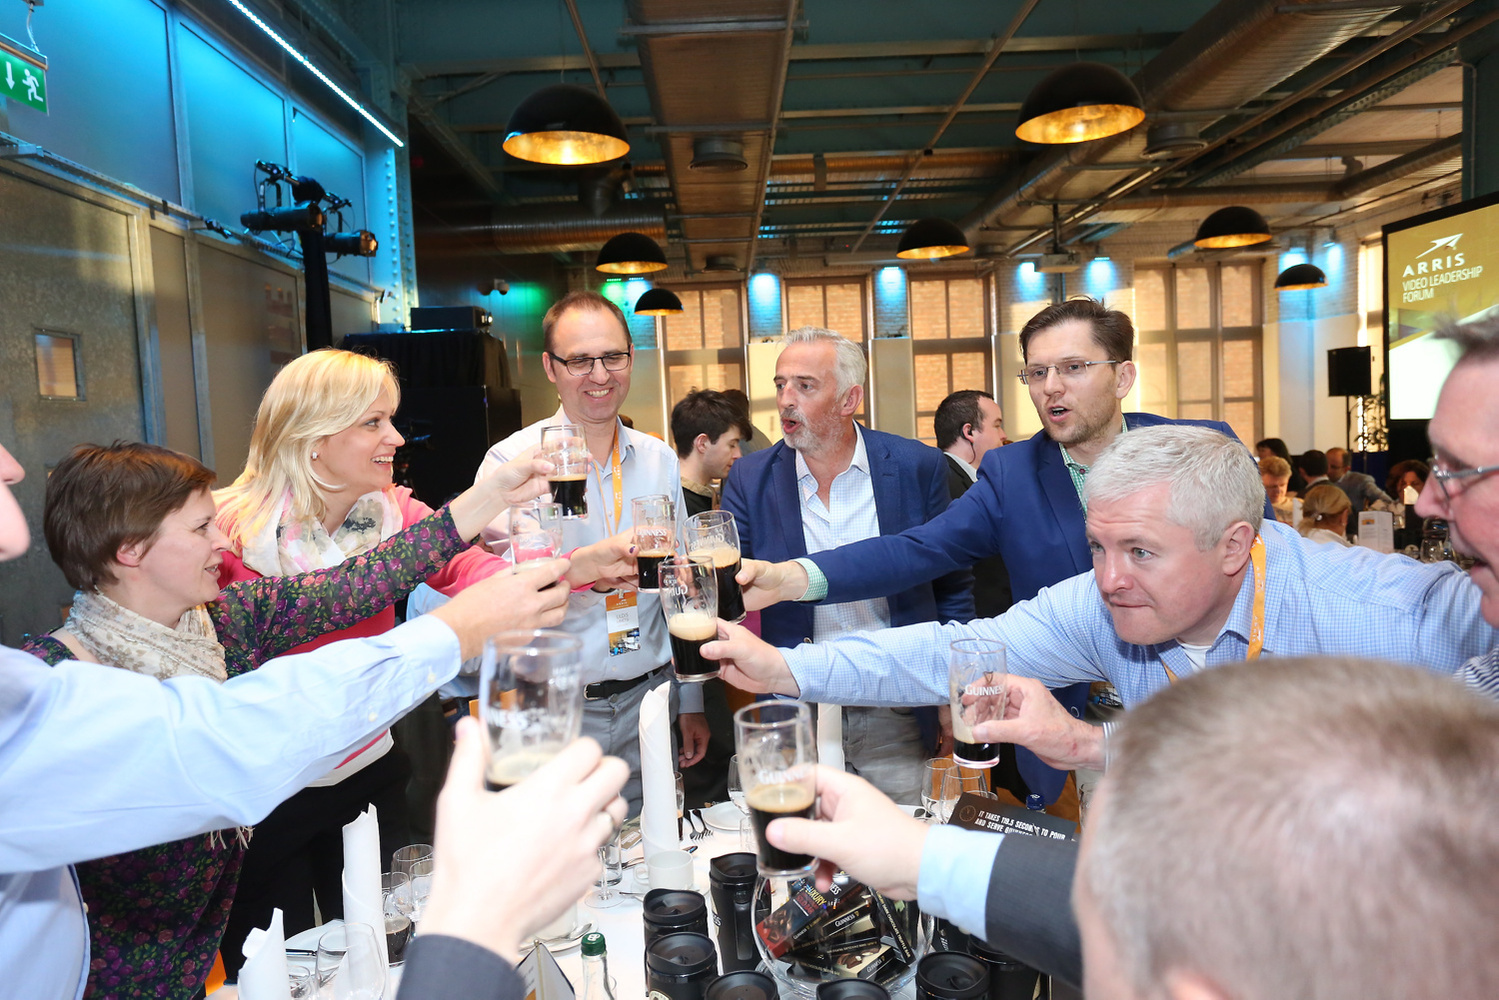 A fun photo of a group of Corporate employees attending the Arris conference and drinking pints of Guinness at the Guinness Storehouse in Dublin 